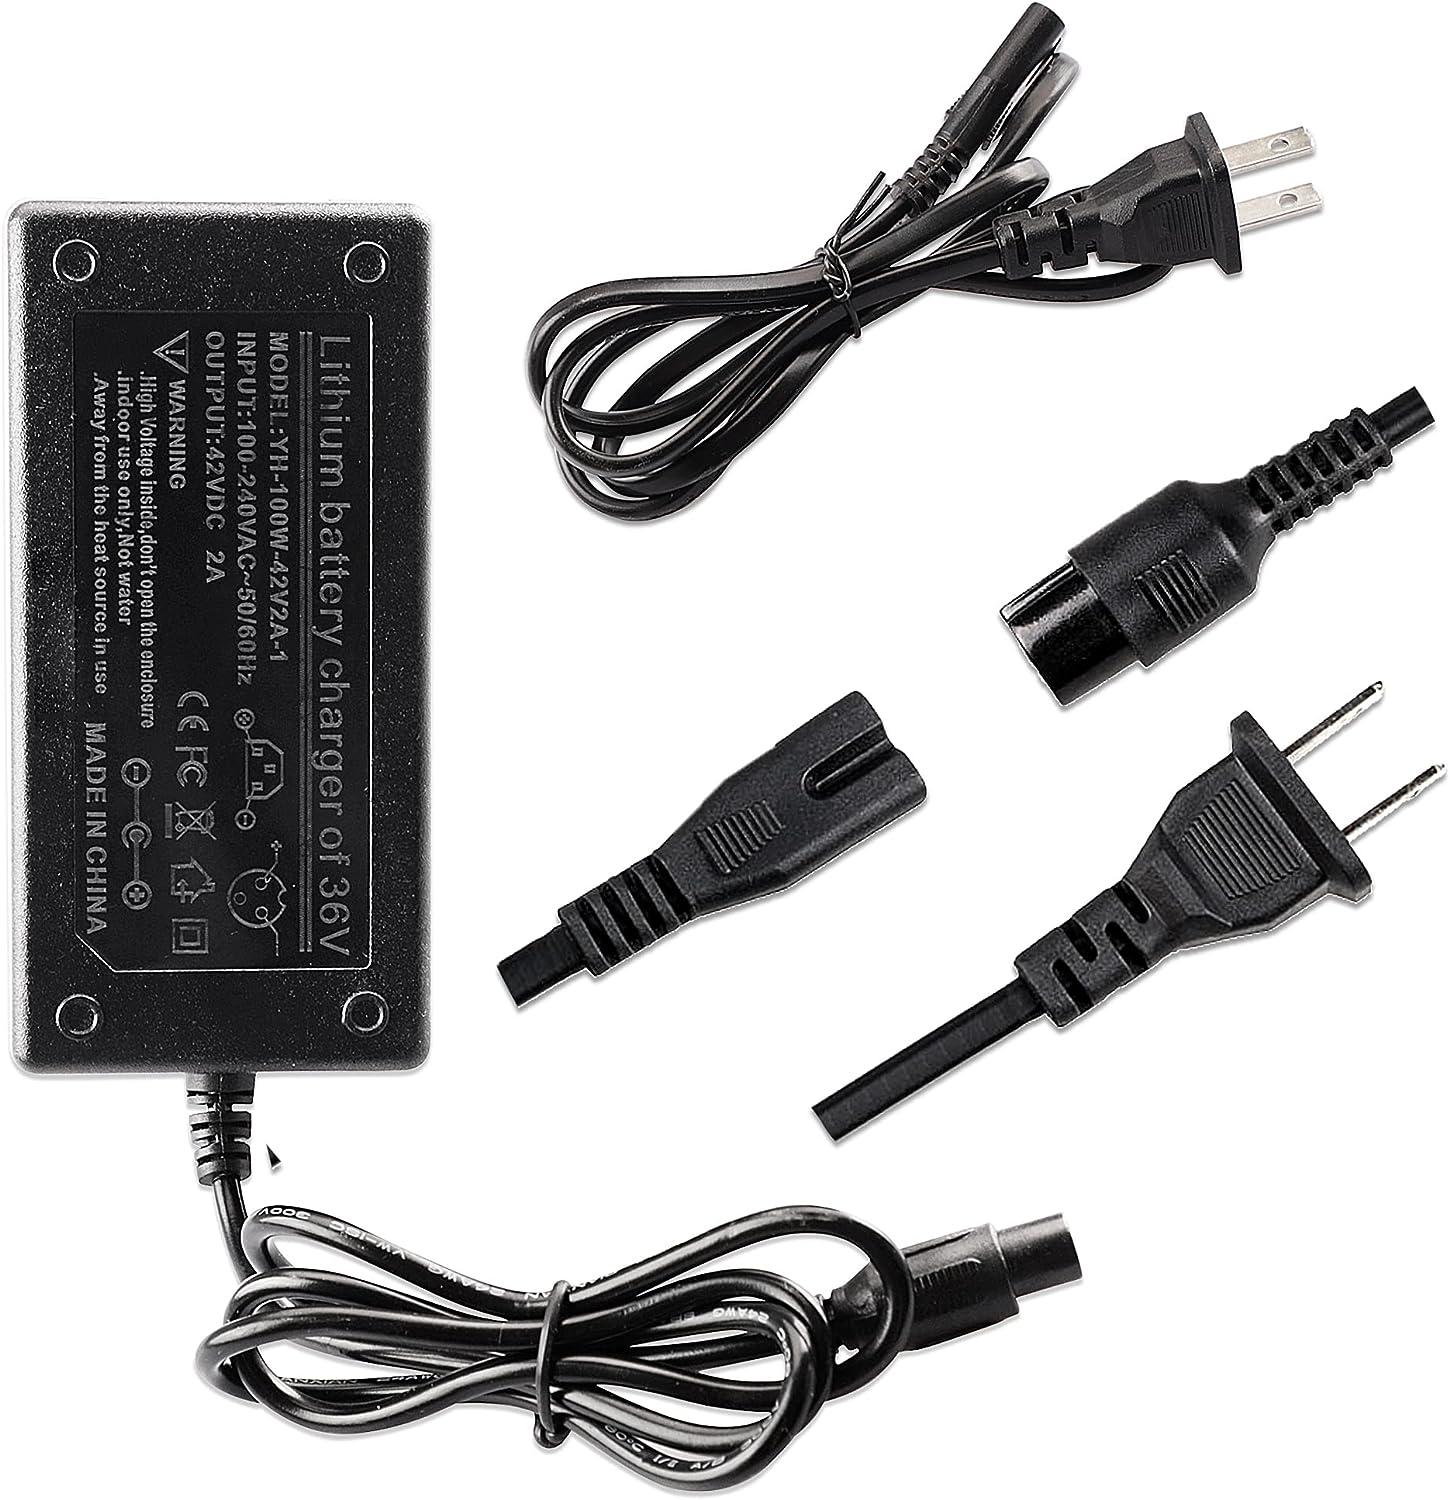 42V 2A Power Charger Battery Charger With 4 Adapter Line For Electric  Scooter